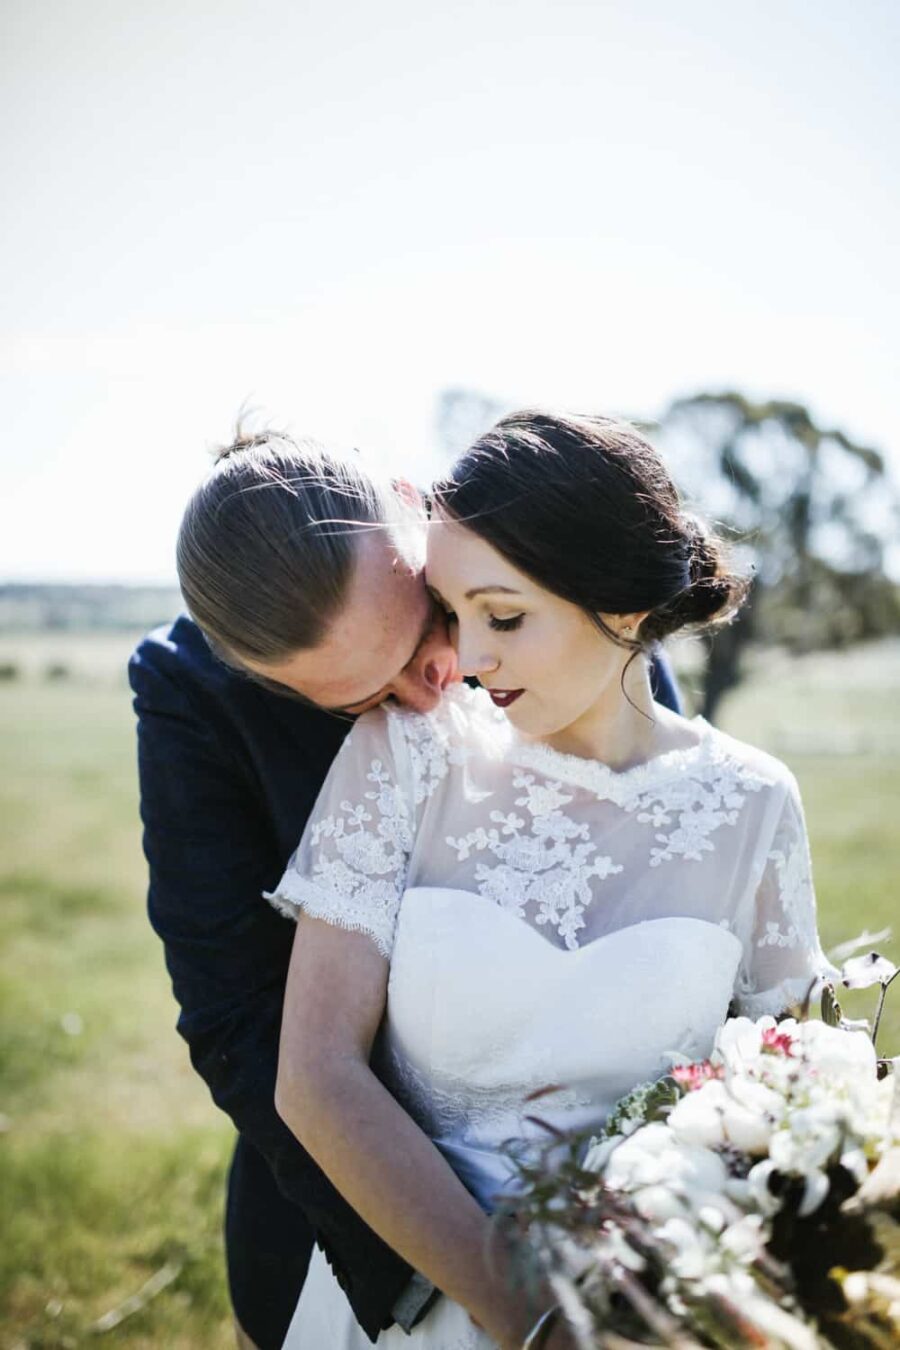 Rustic barn wedding in Kyneton Victoria / Photography by Brown Paper Parcel